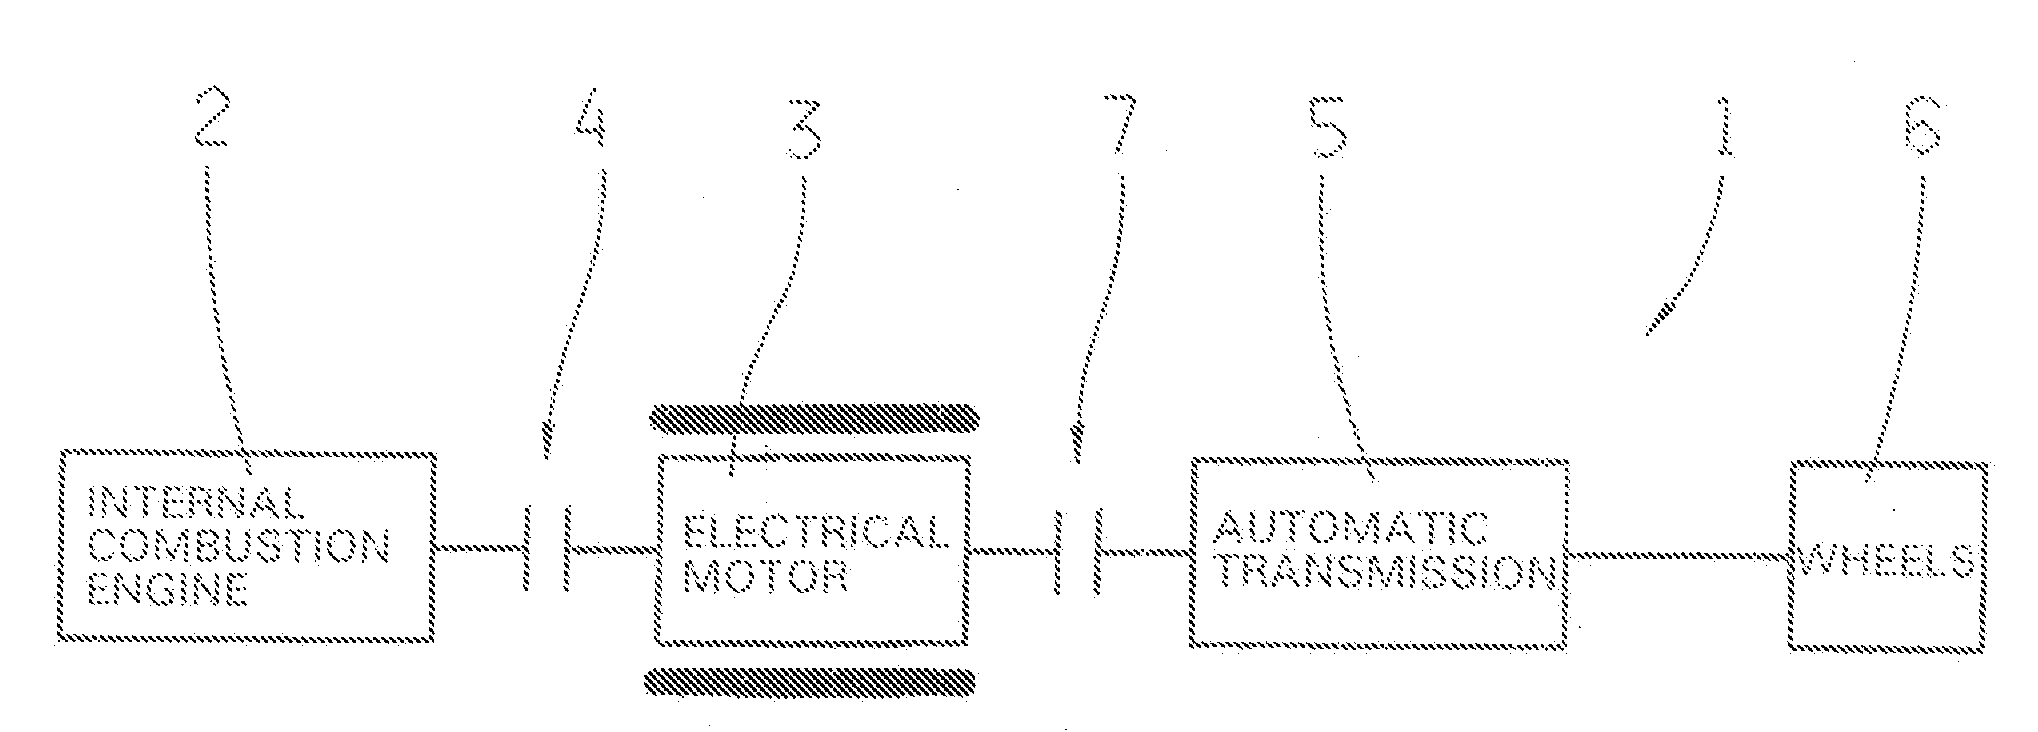 Method for operating a drive train